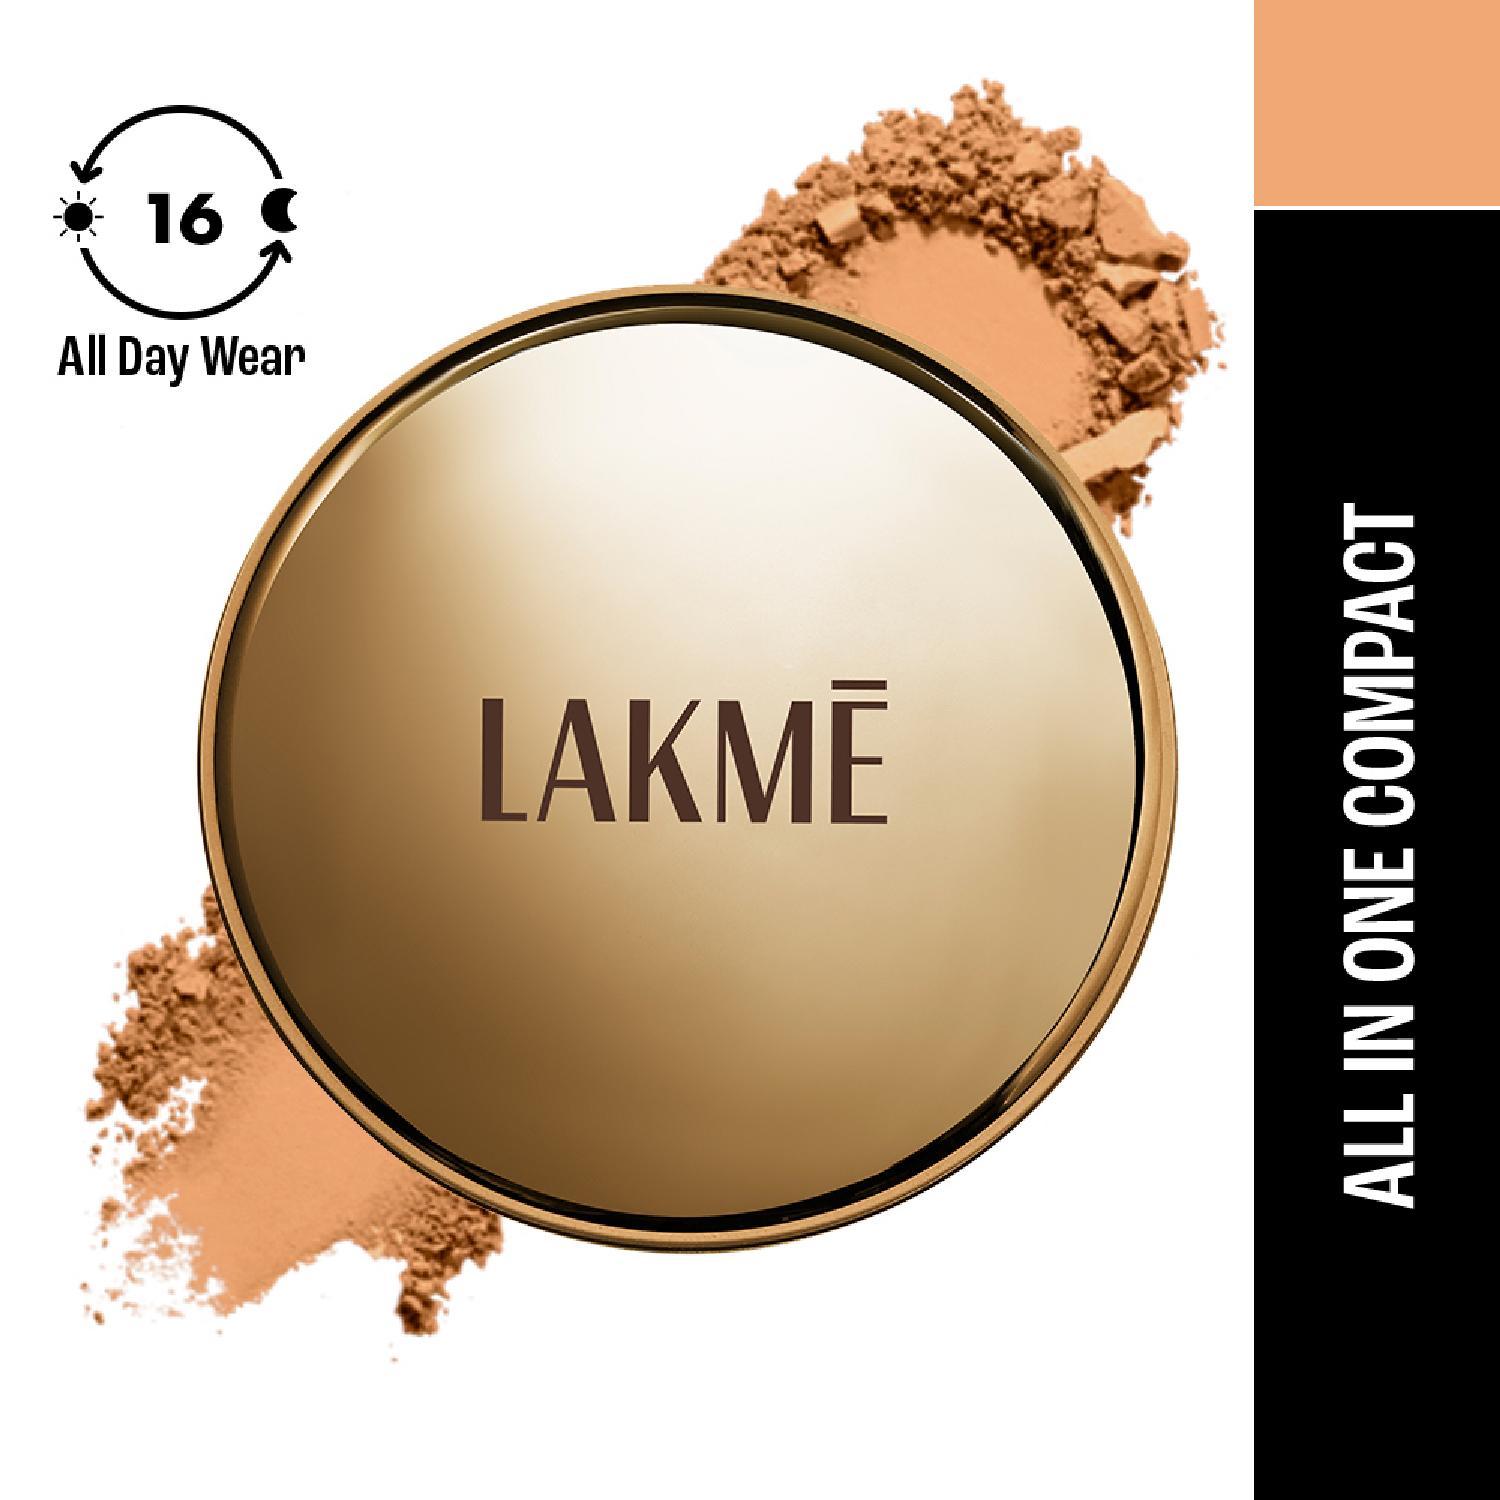 Lakme Powerplay Priming Powder Foundation, 3-in-1, Natural Light (9 g)